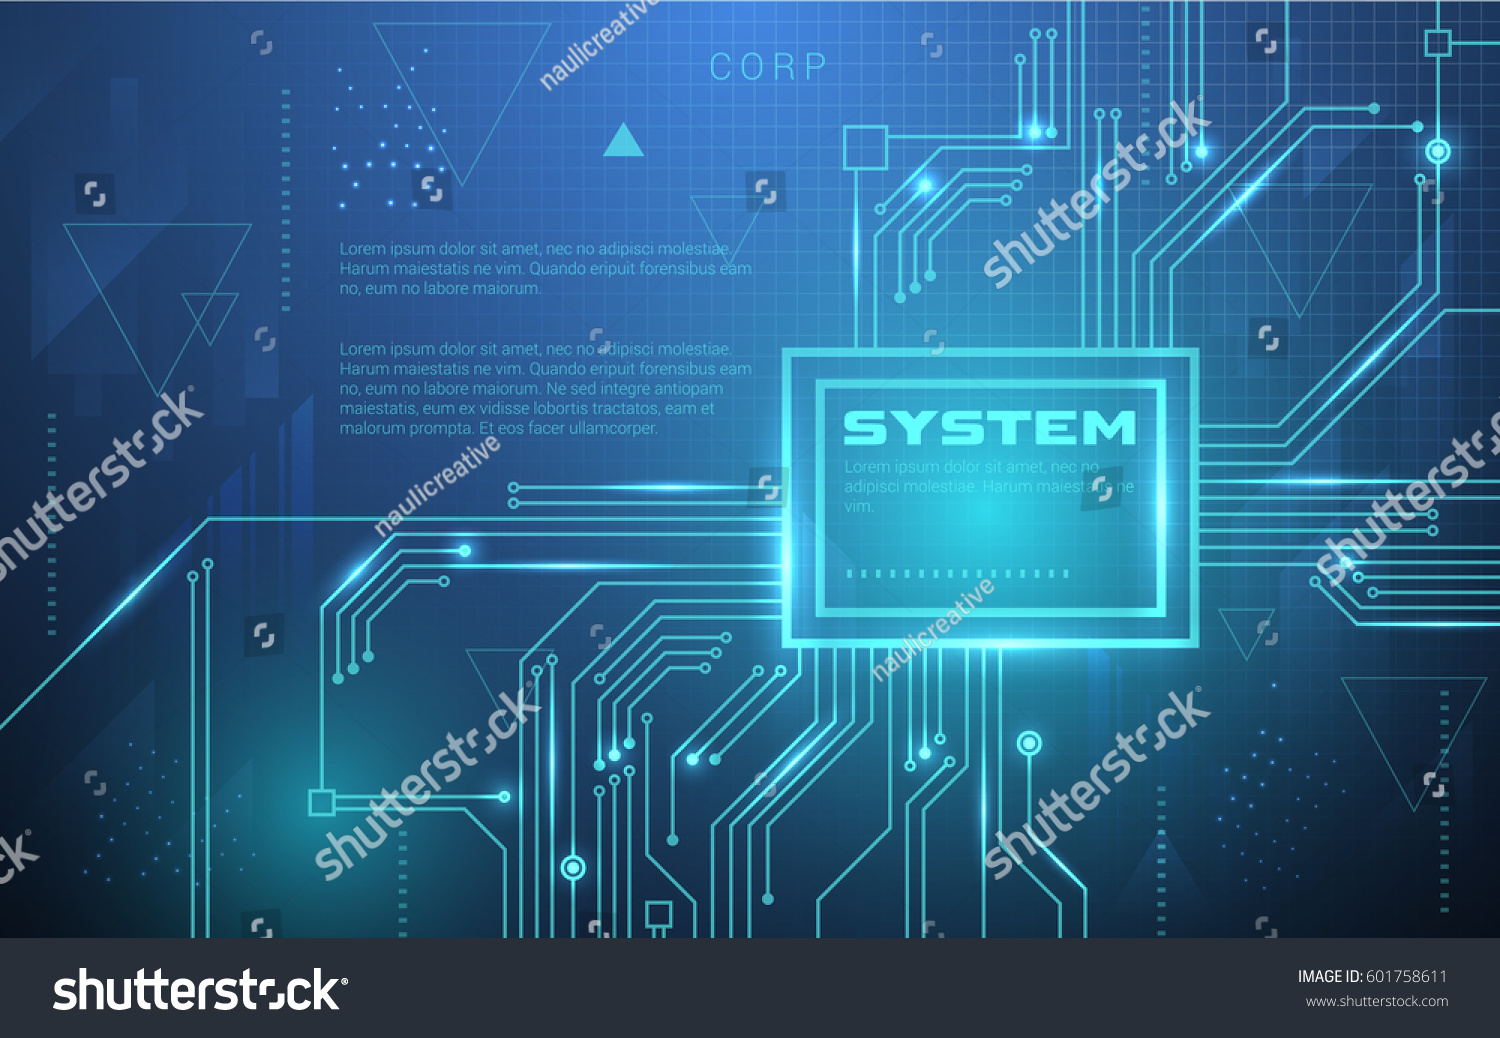 Ultra HD Abstract Sci Fi Technology Stock Vector Royalty